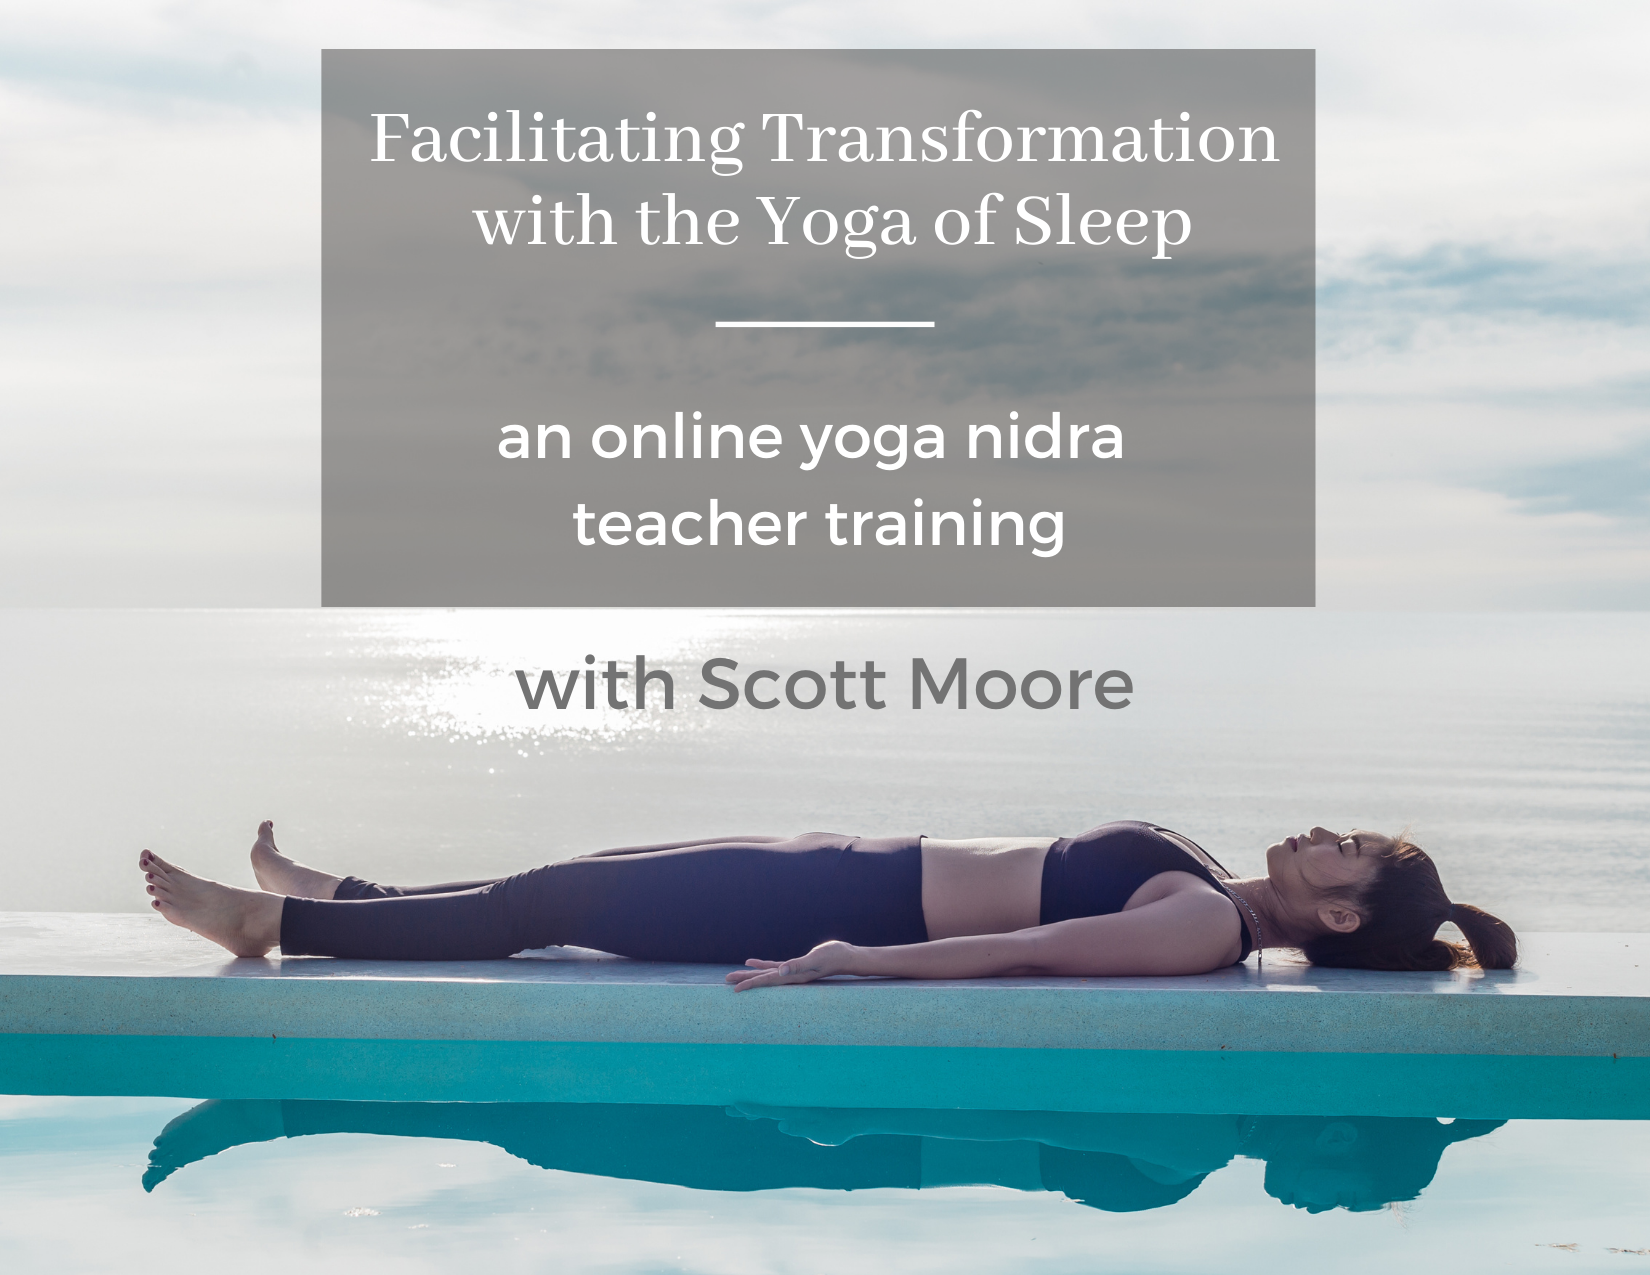 Yoga nidra weekly online practice with journaling prompts for emotional  wellbeing. — Life Transition Coach, Mental + Emotional Wellness Coaching